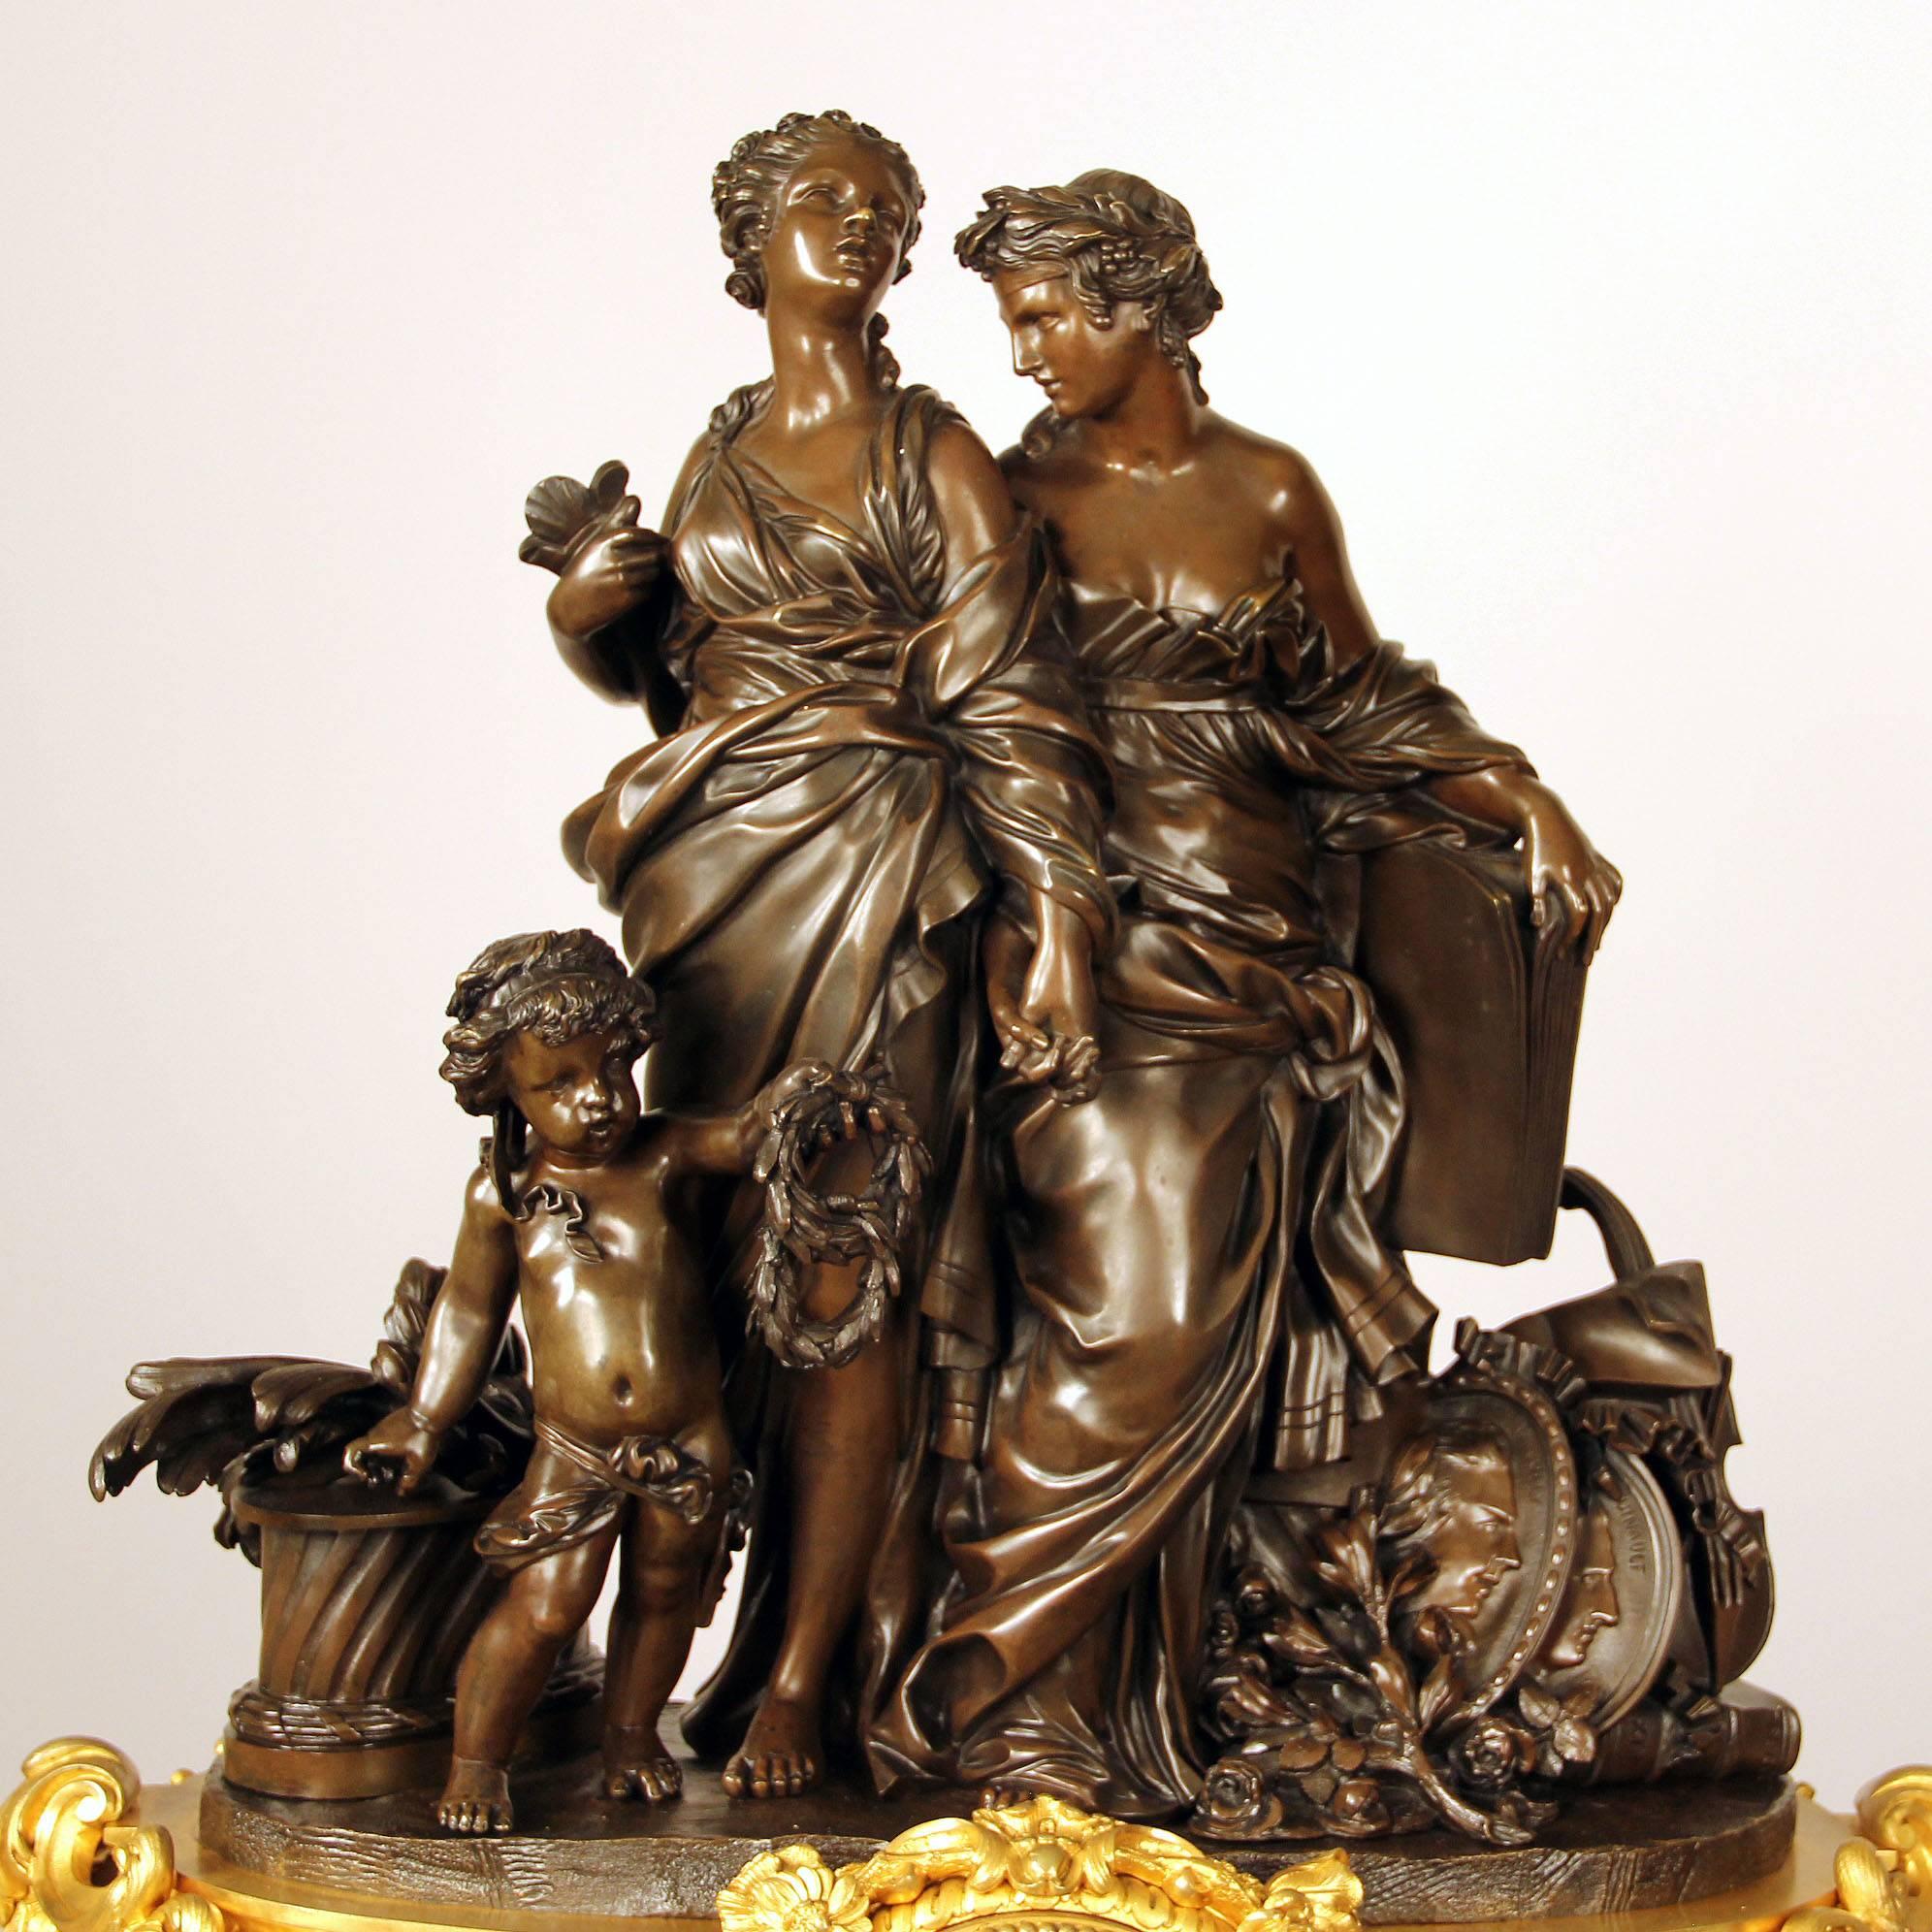 An exceptional and very fine late 19th century gilt and patinated bronze figural mantle clock 

By Jean-François and Guillaume Denière

The fine bronze sculpture of two maidens and a cherub with instruments, books and trophies sitting upon a